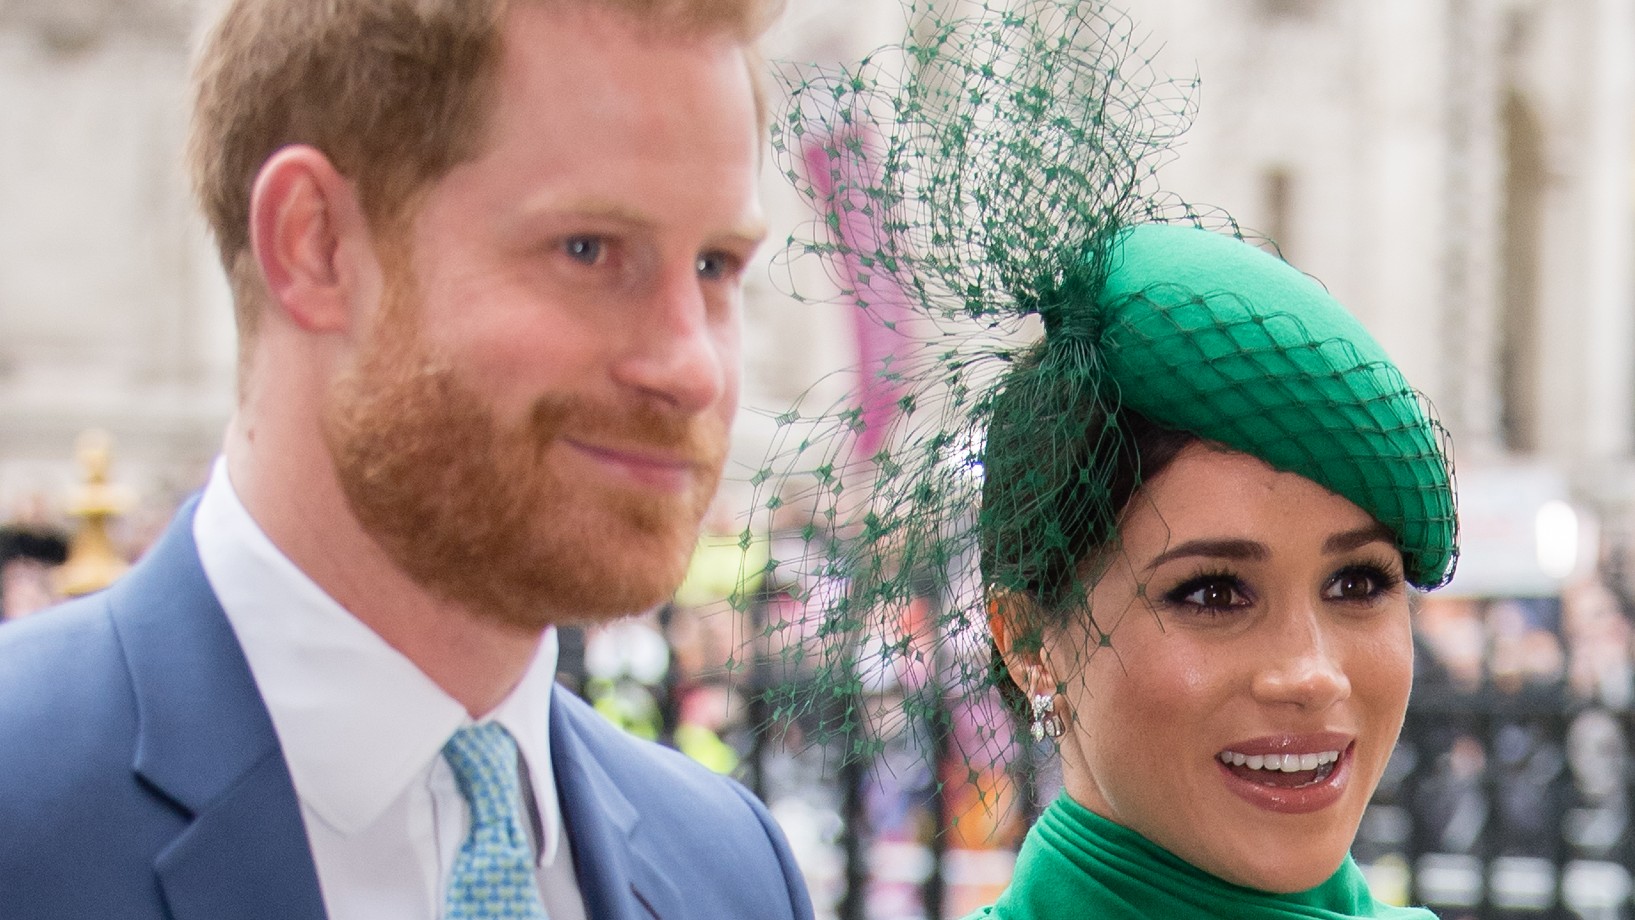 If Prince Harry and Meghan Markle Don't Show Up to the Coronation, It Would Be a "Fatal, Irreversible Blow" for the Royal Rift: Expert